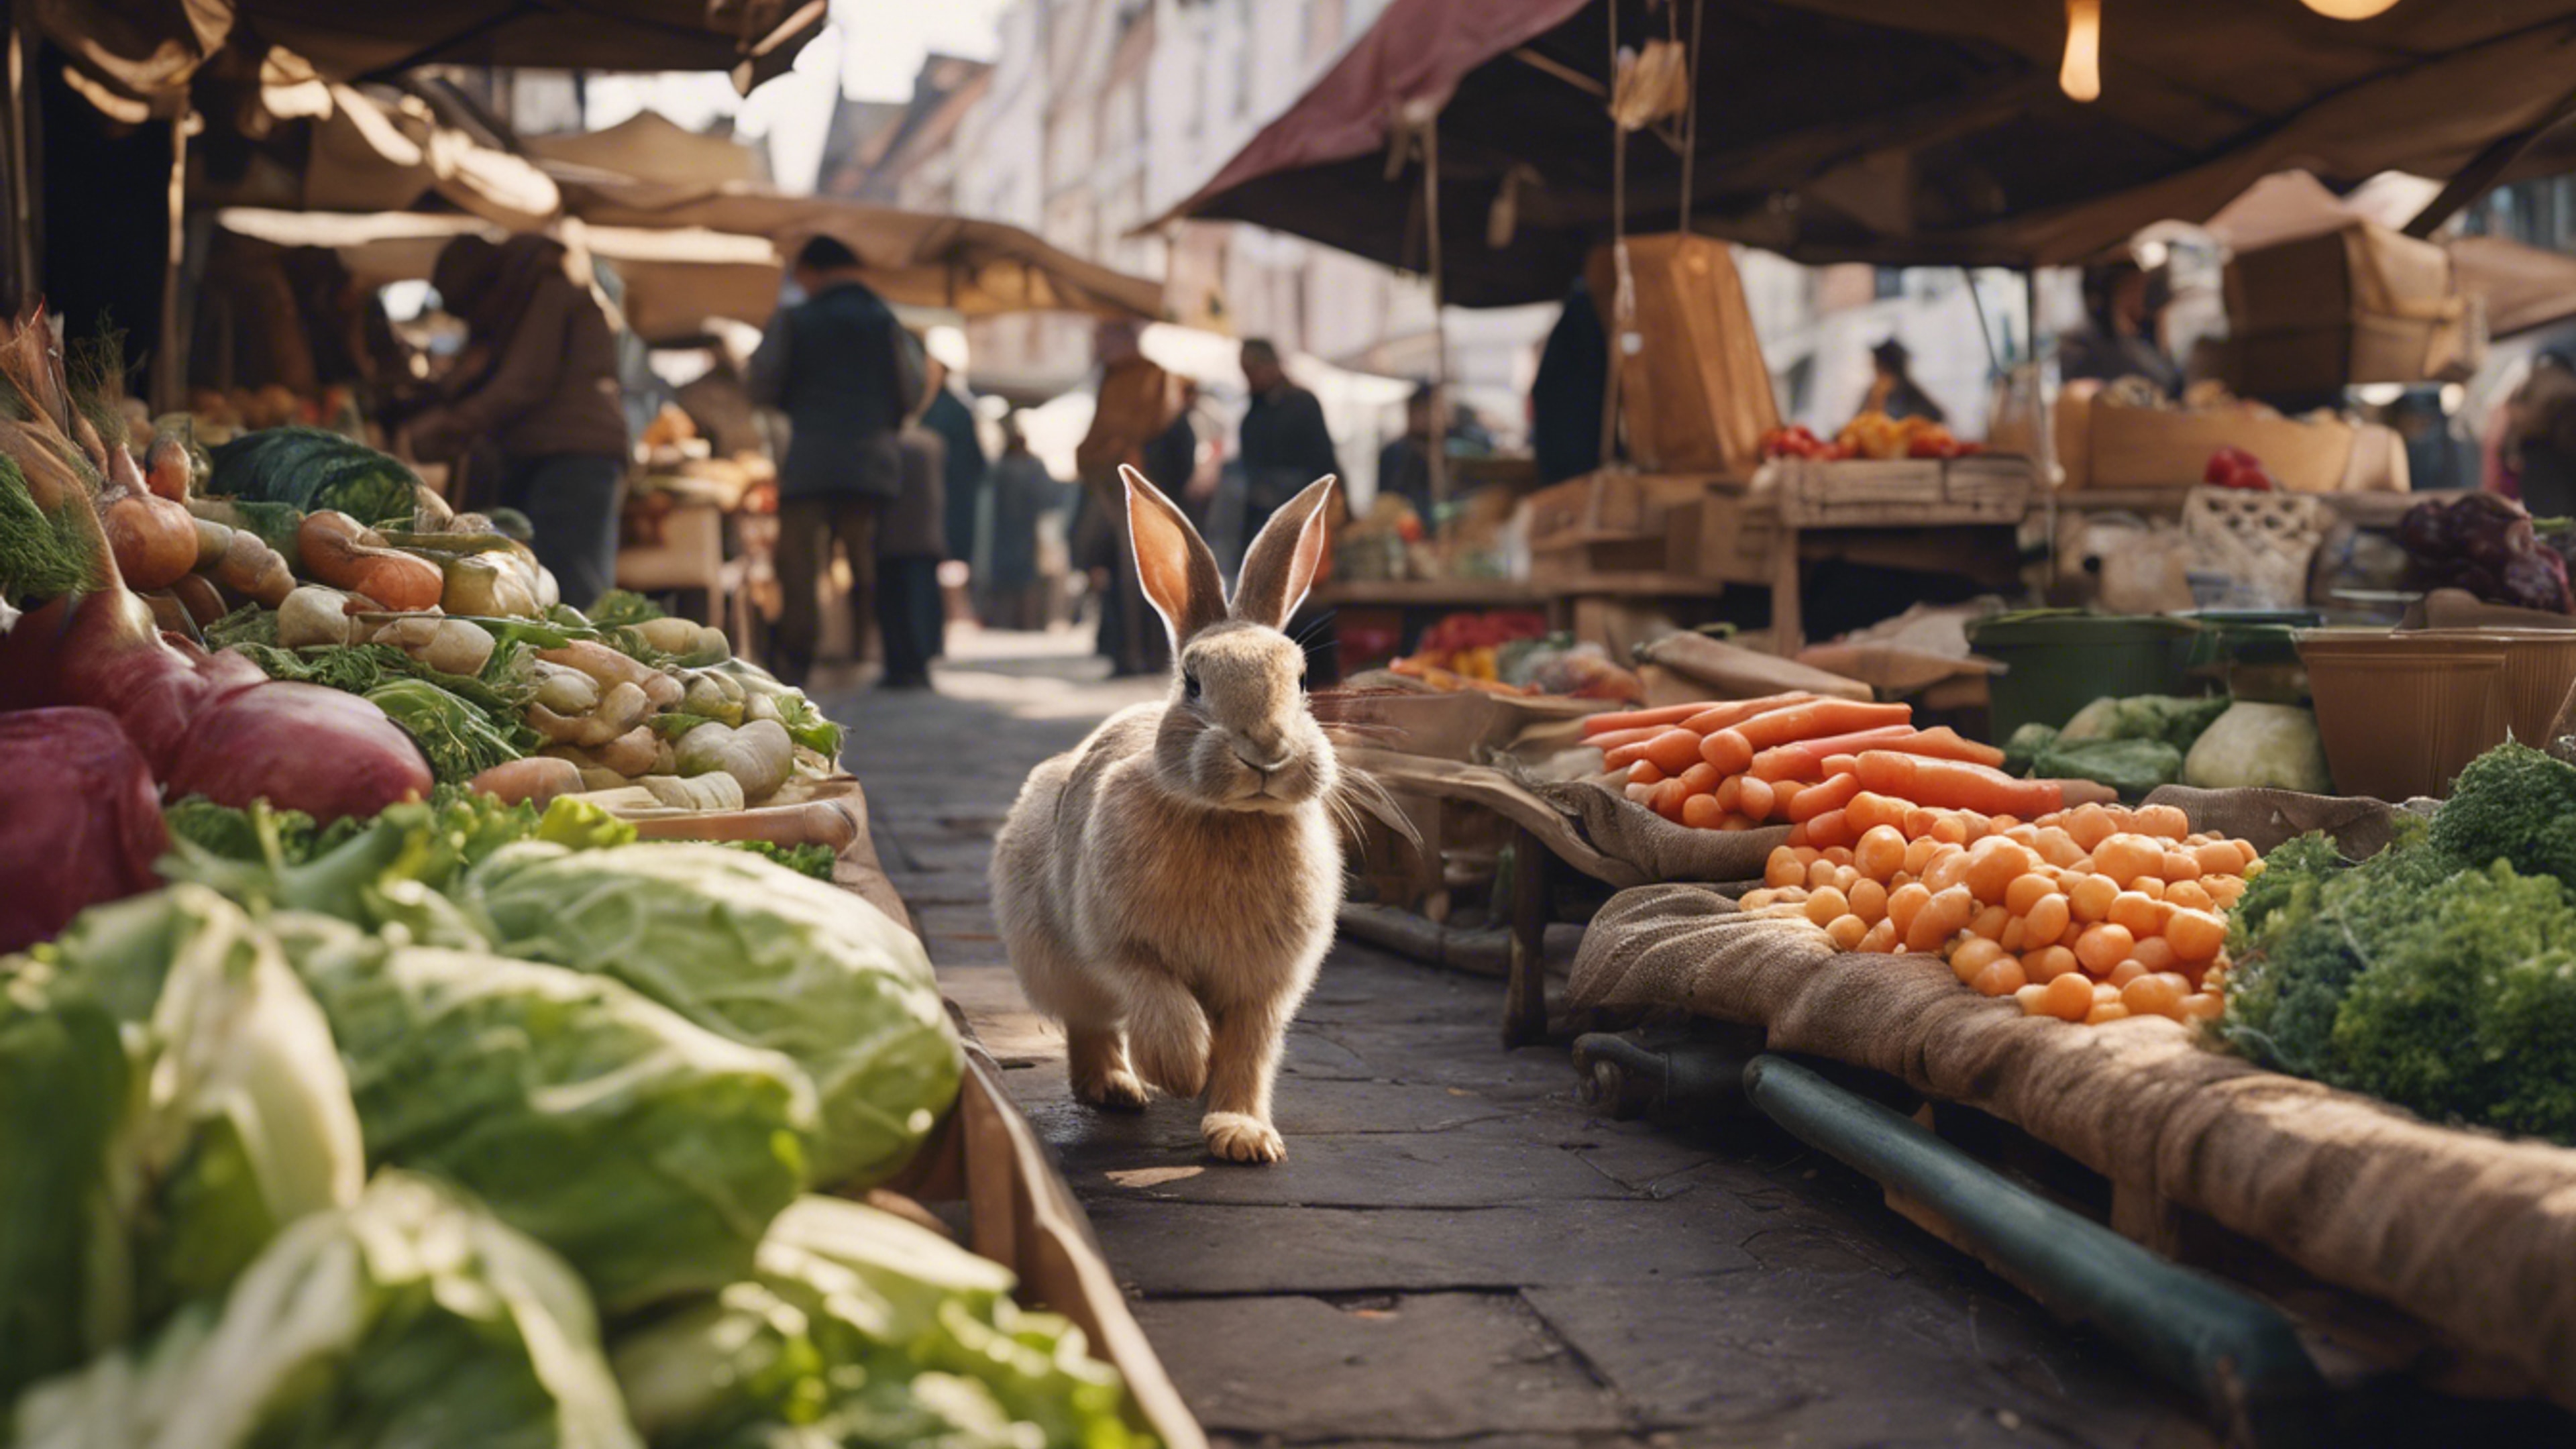 A rabbit running a vegetable stall in an old-fashioned market. Wallpaper[95b88699917c48c6bf62]